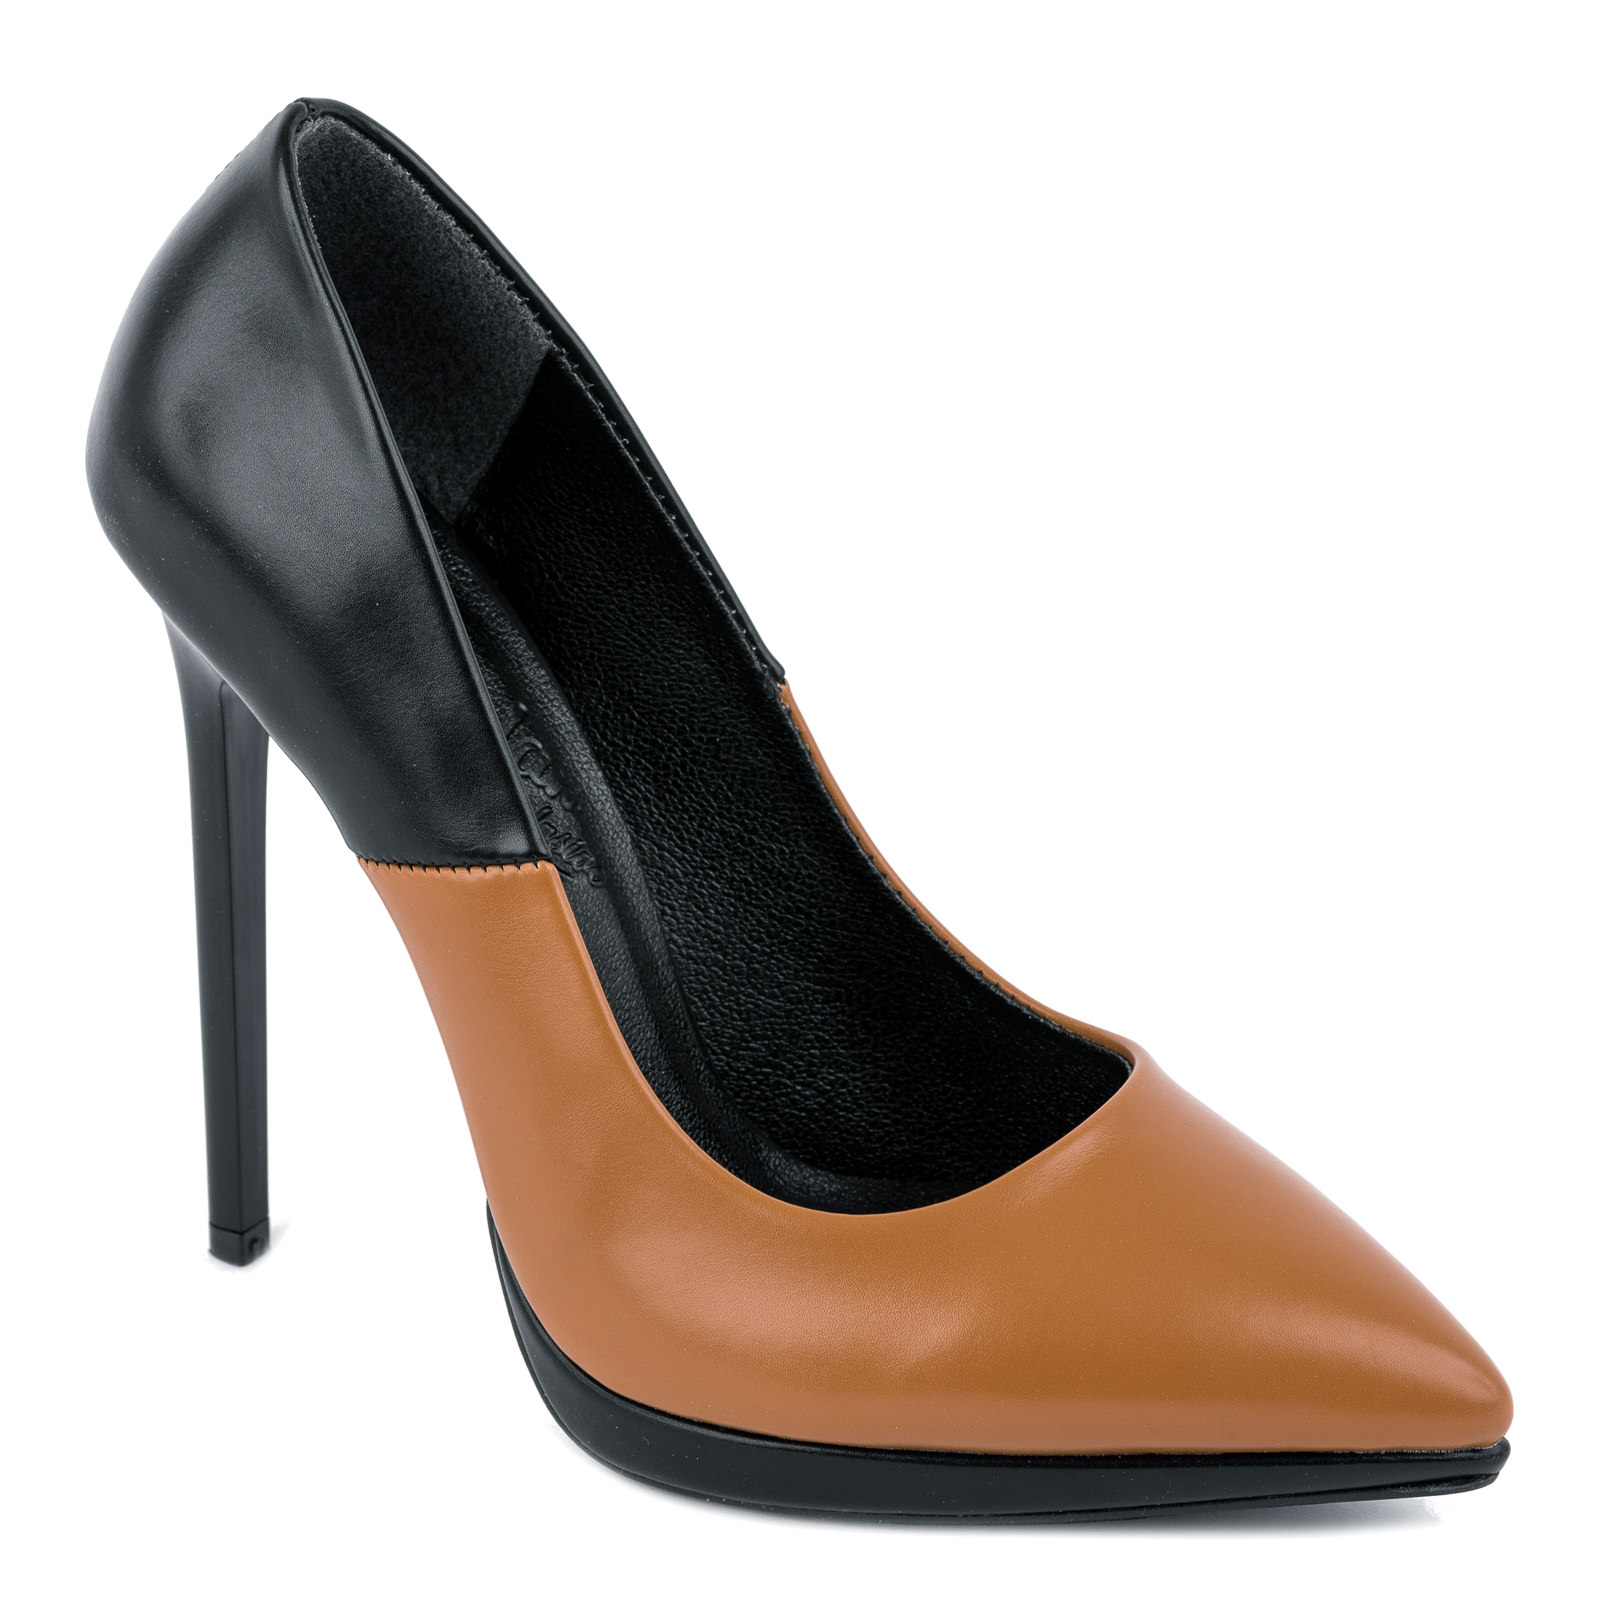 STILETTO SHOES WITH THIN HEEL - BLACK/CAMEL